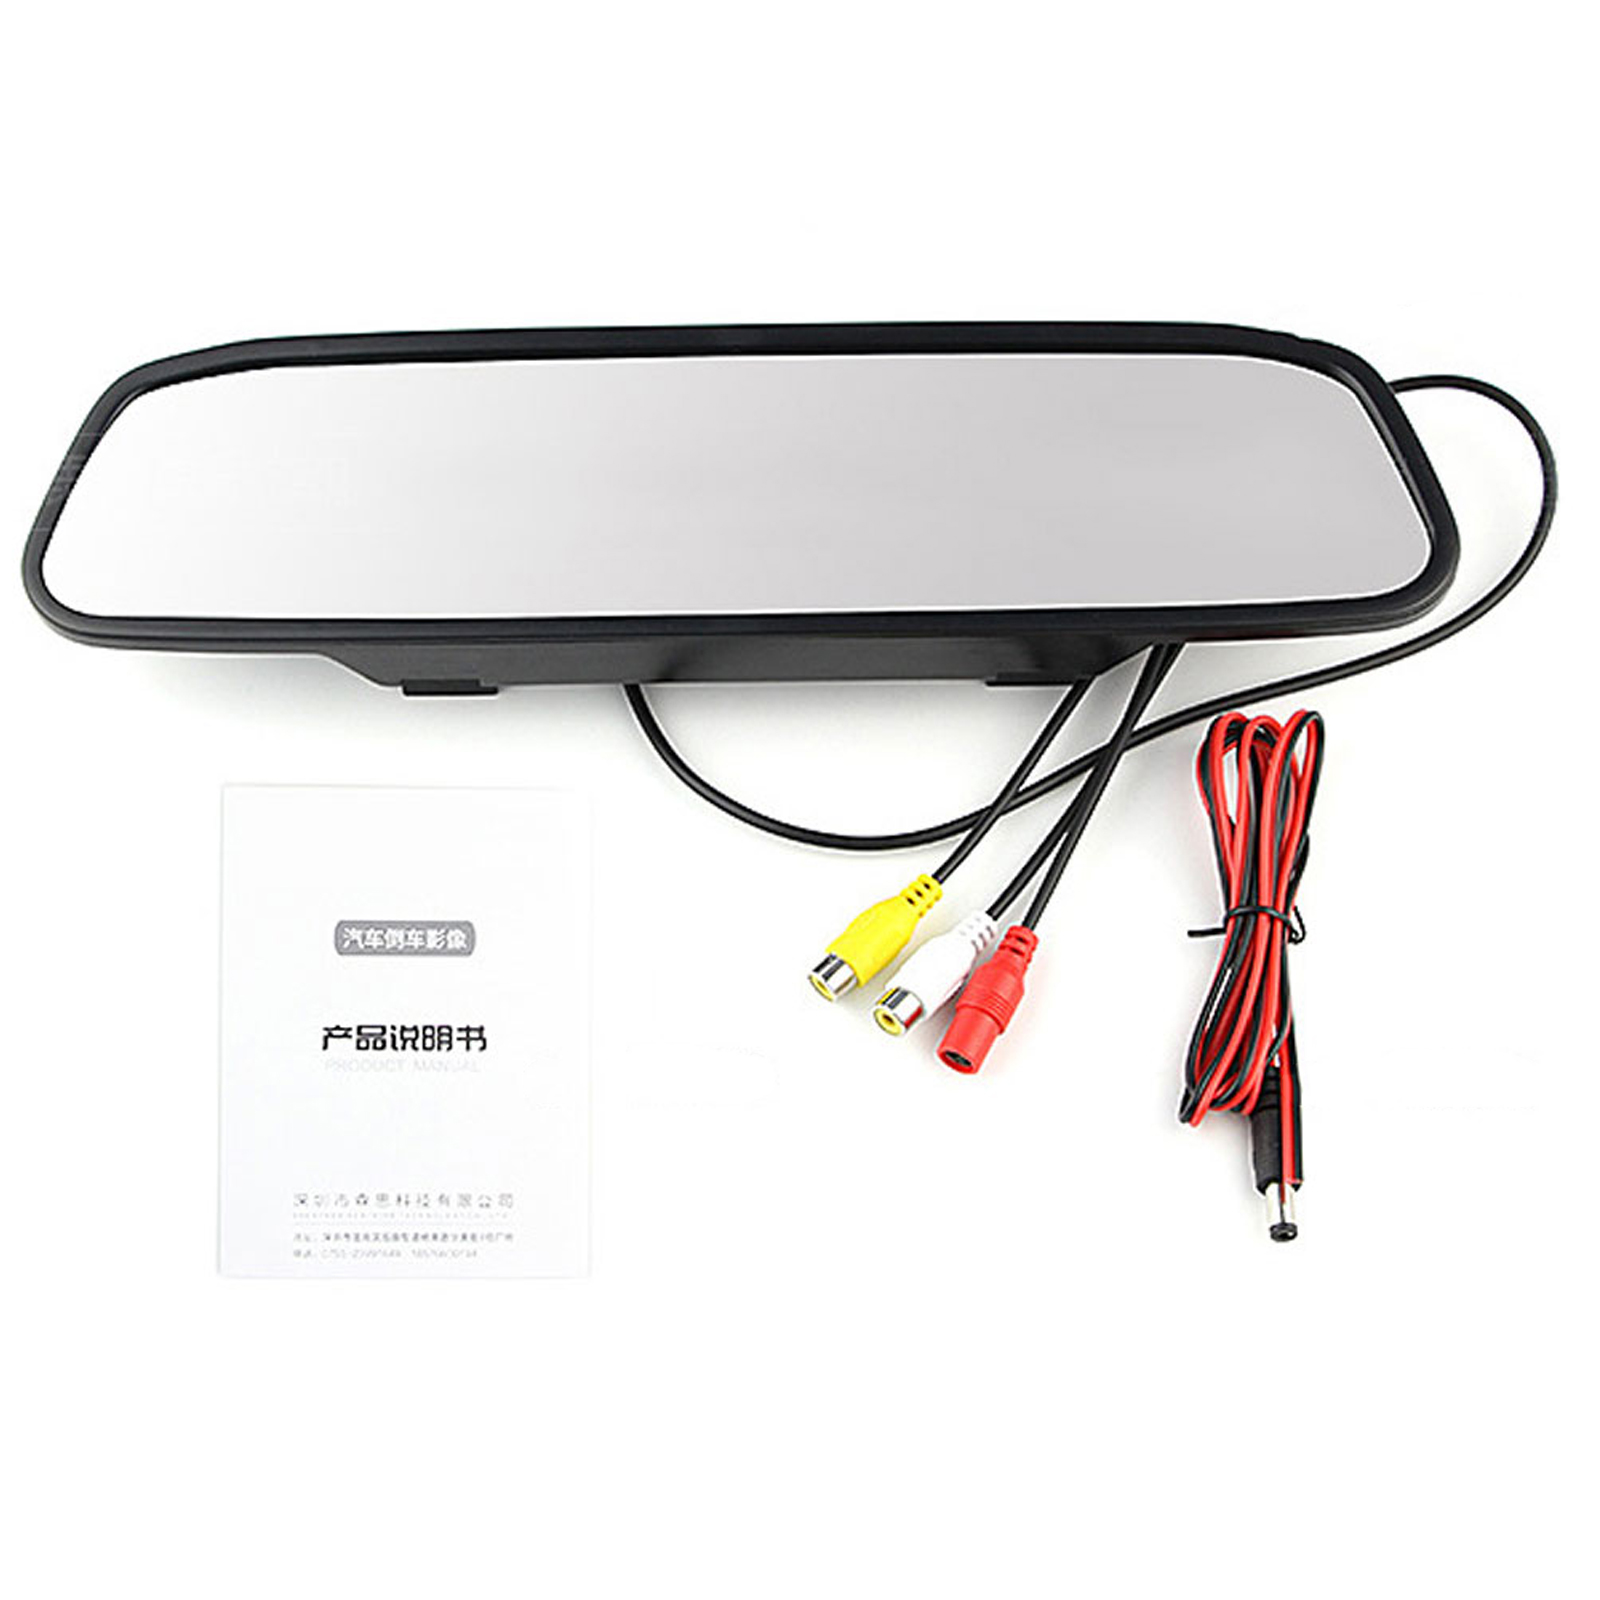 12V Car Video Parking Monitor 4.3 Inch High-Definition Rear View Camera Display Auto Interior Replacement